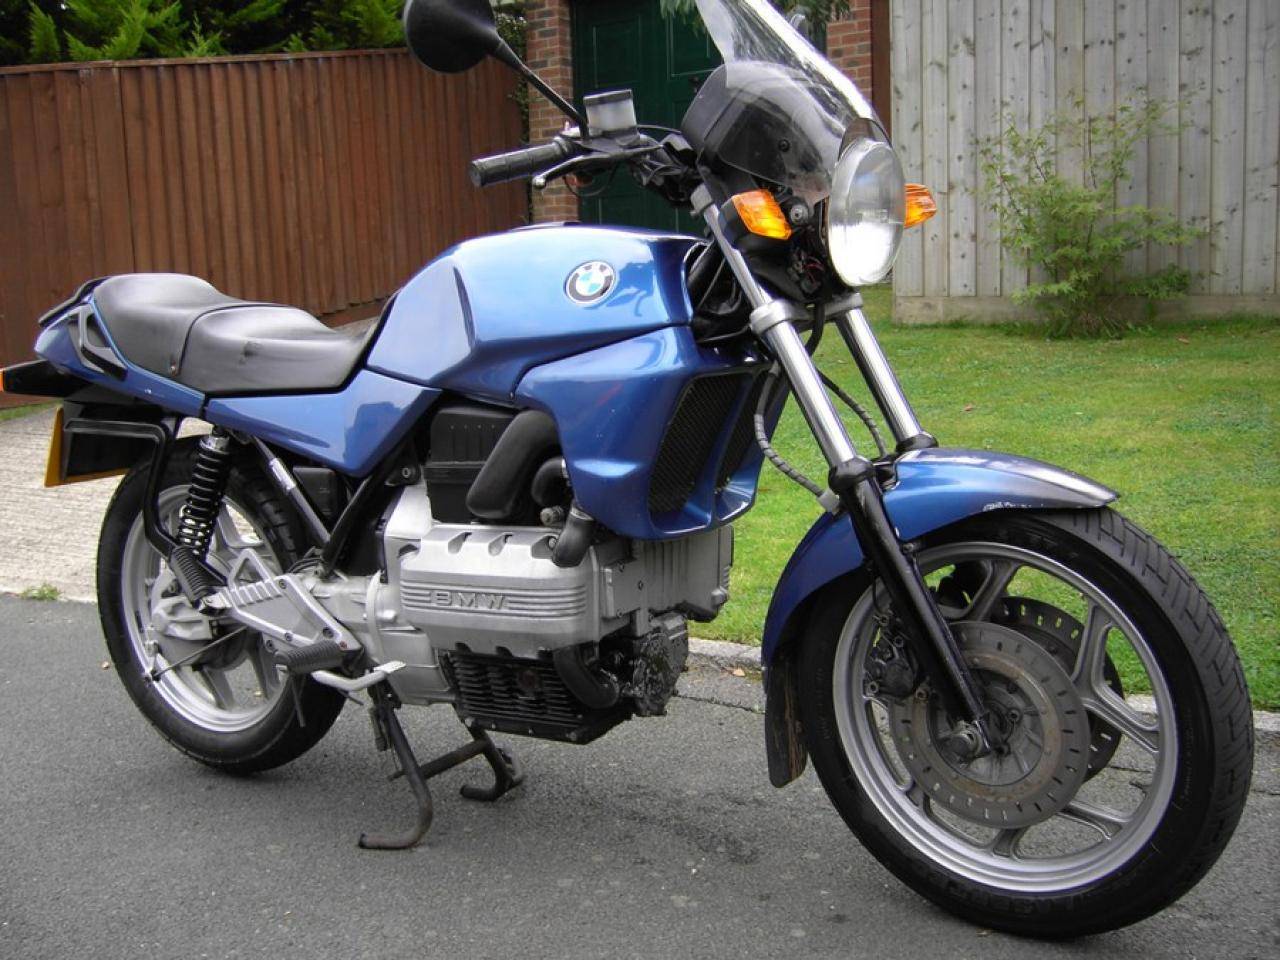 Review of the bmw k75: a classic motorcycle with timeless appeal